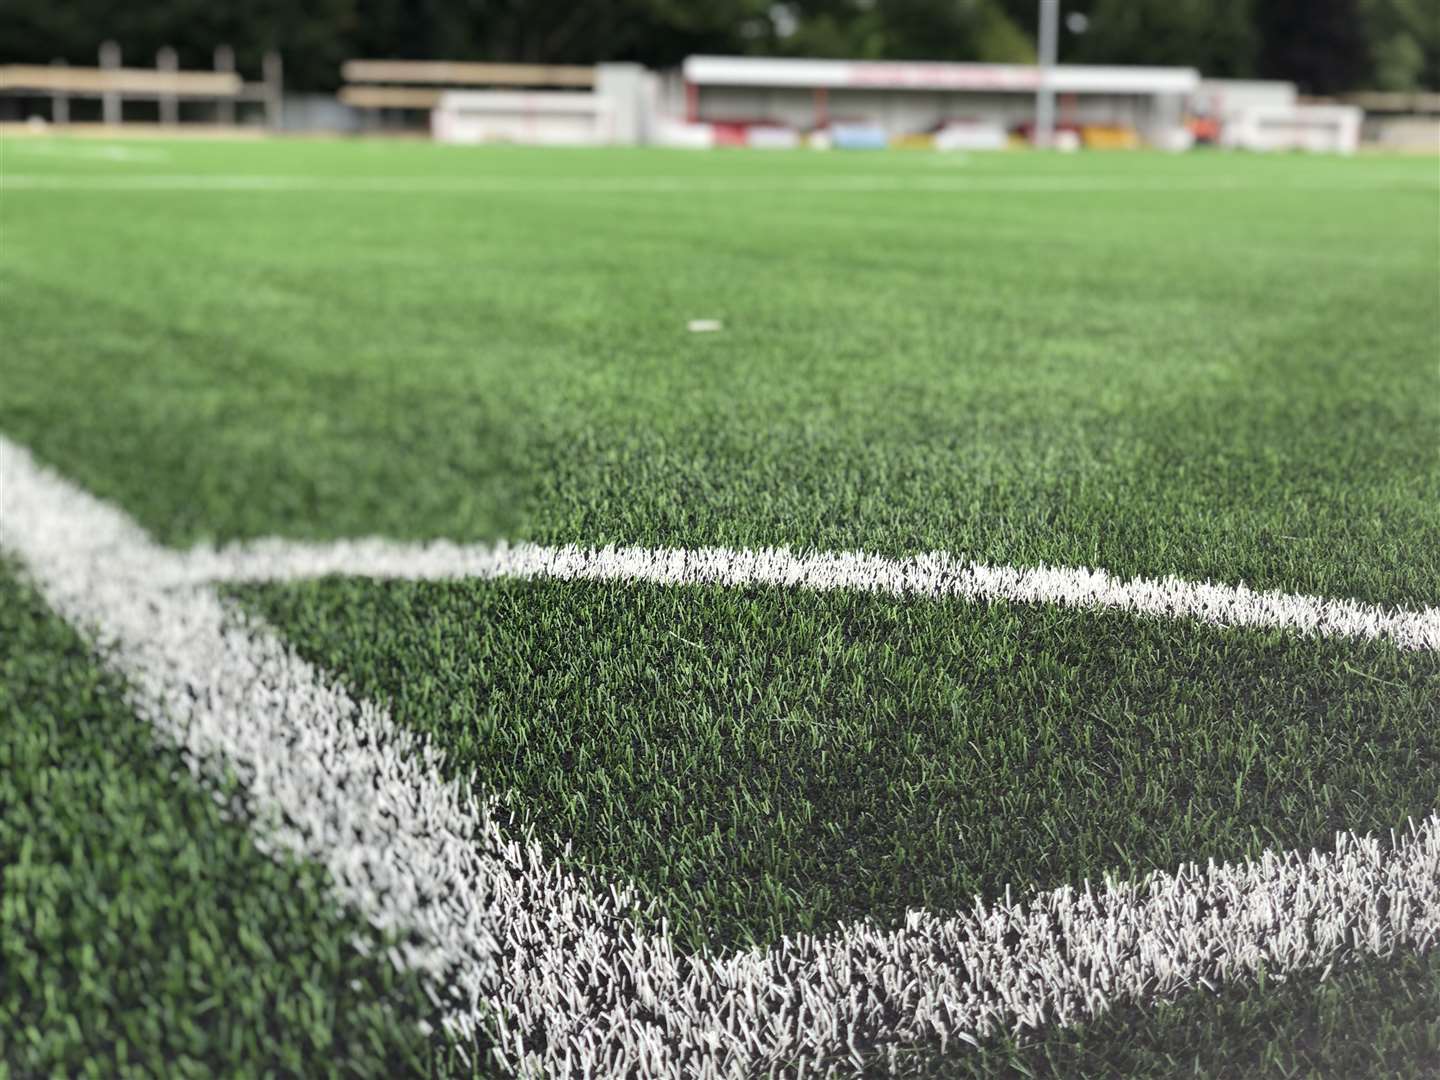 Chatham Town's new 3G pitch was installed last summer